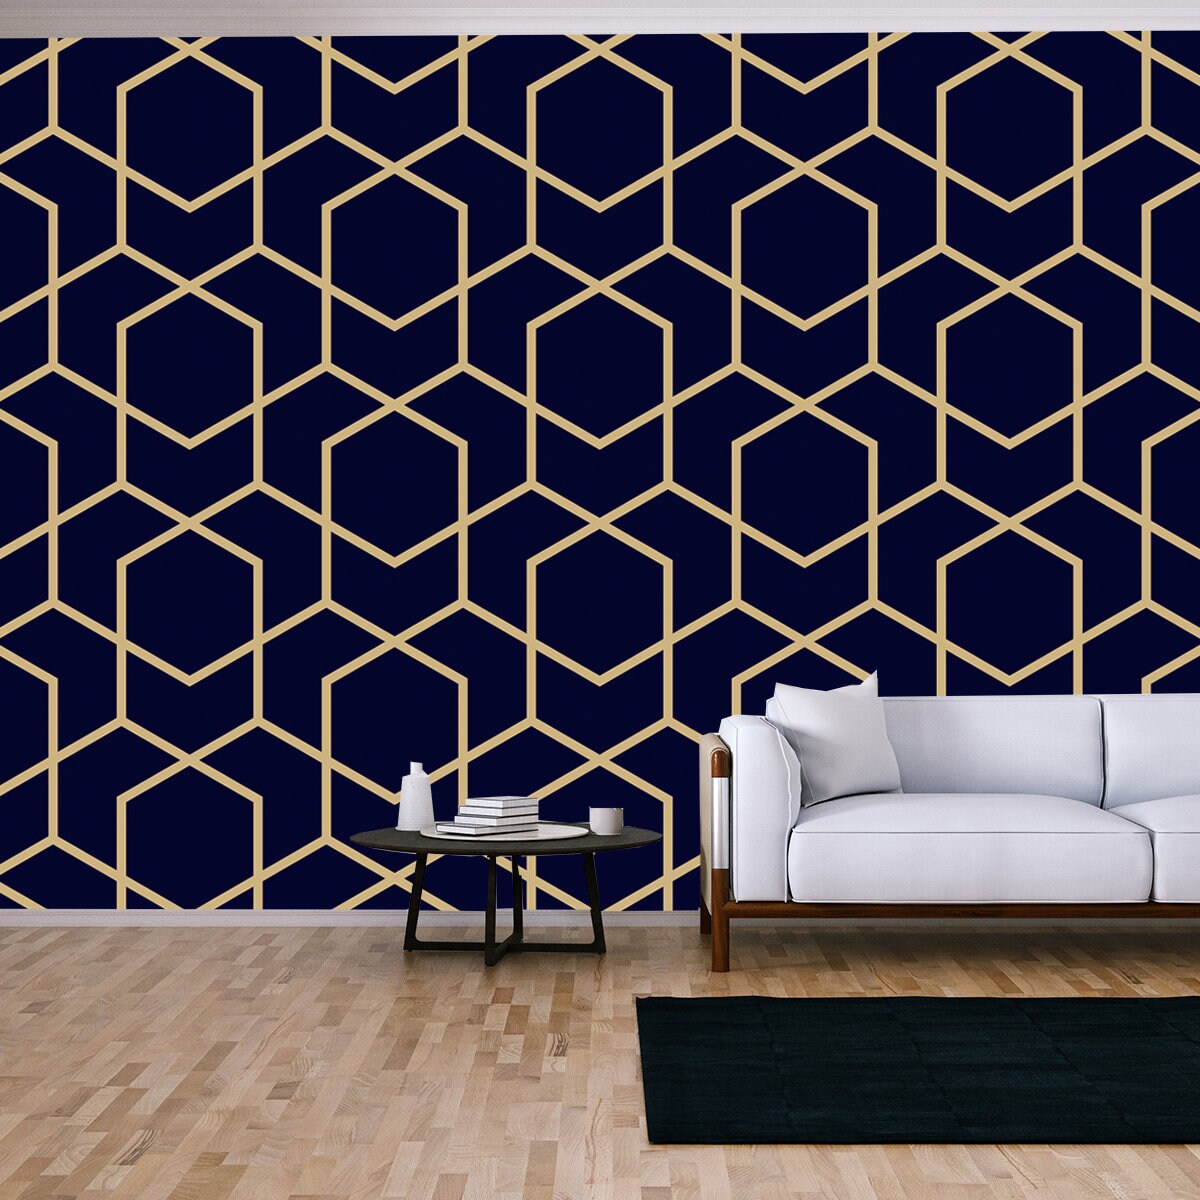 Abstract Geometric Pattern with Lines, Rhombuses. Blue-Black and Gold Texture Wallpaper Living Room Mural